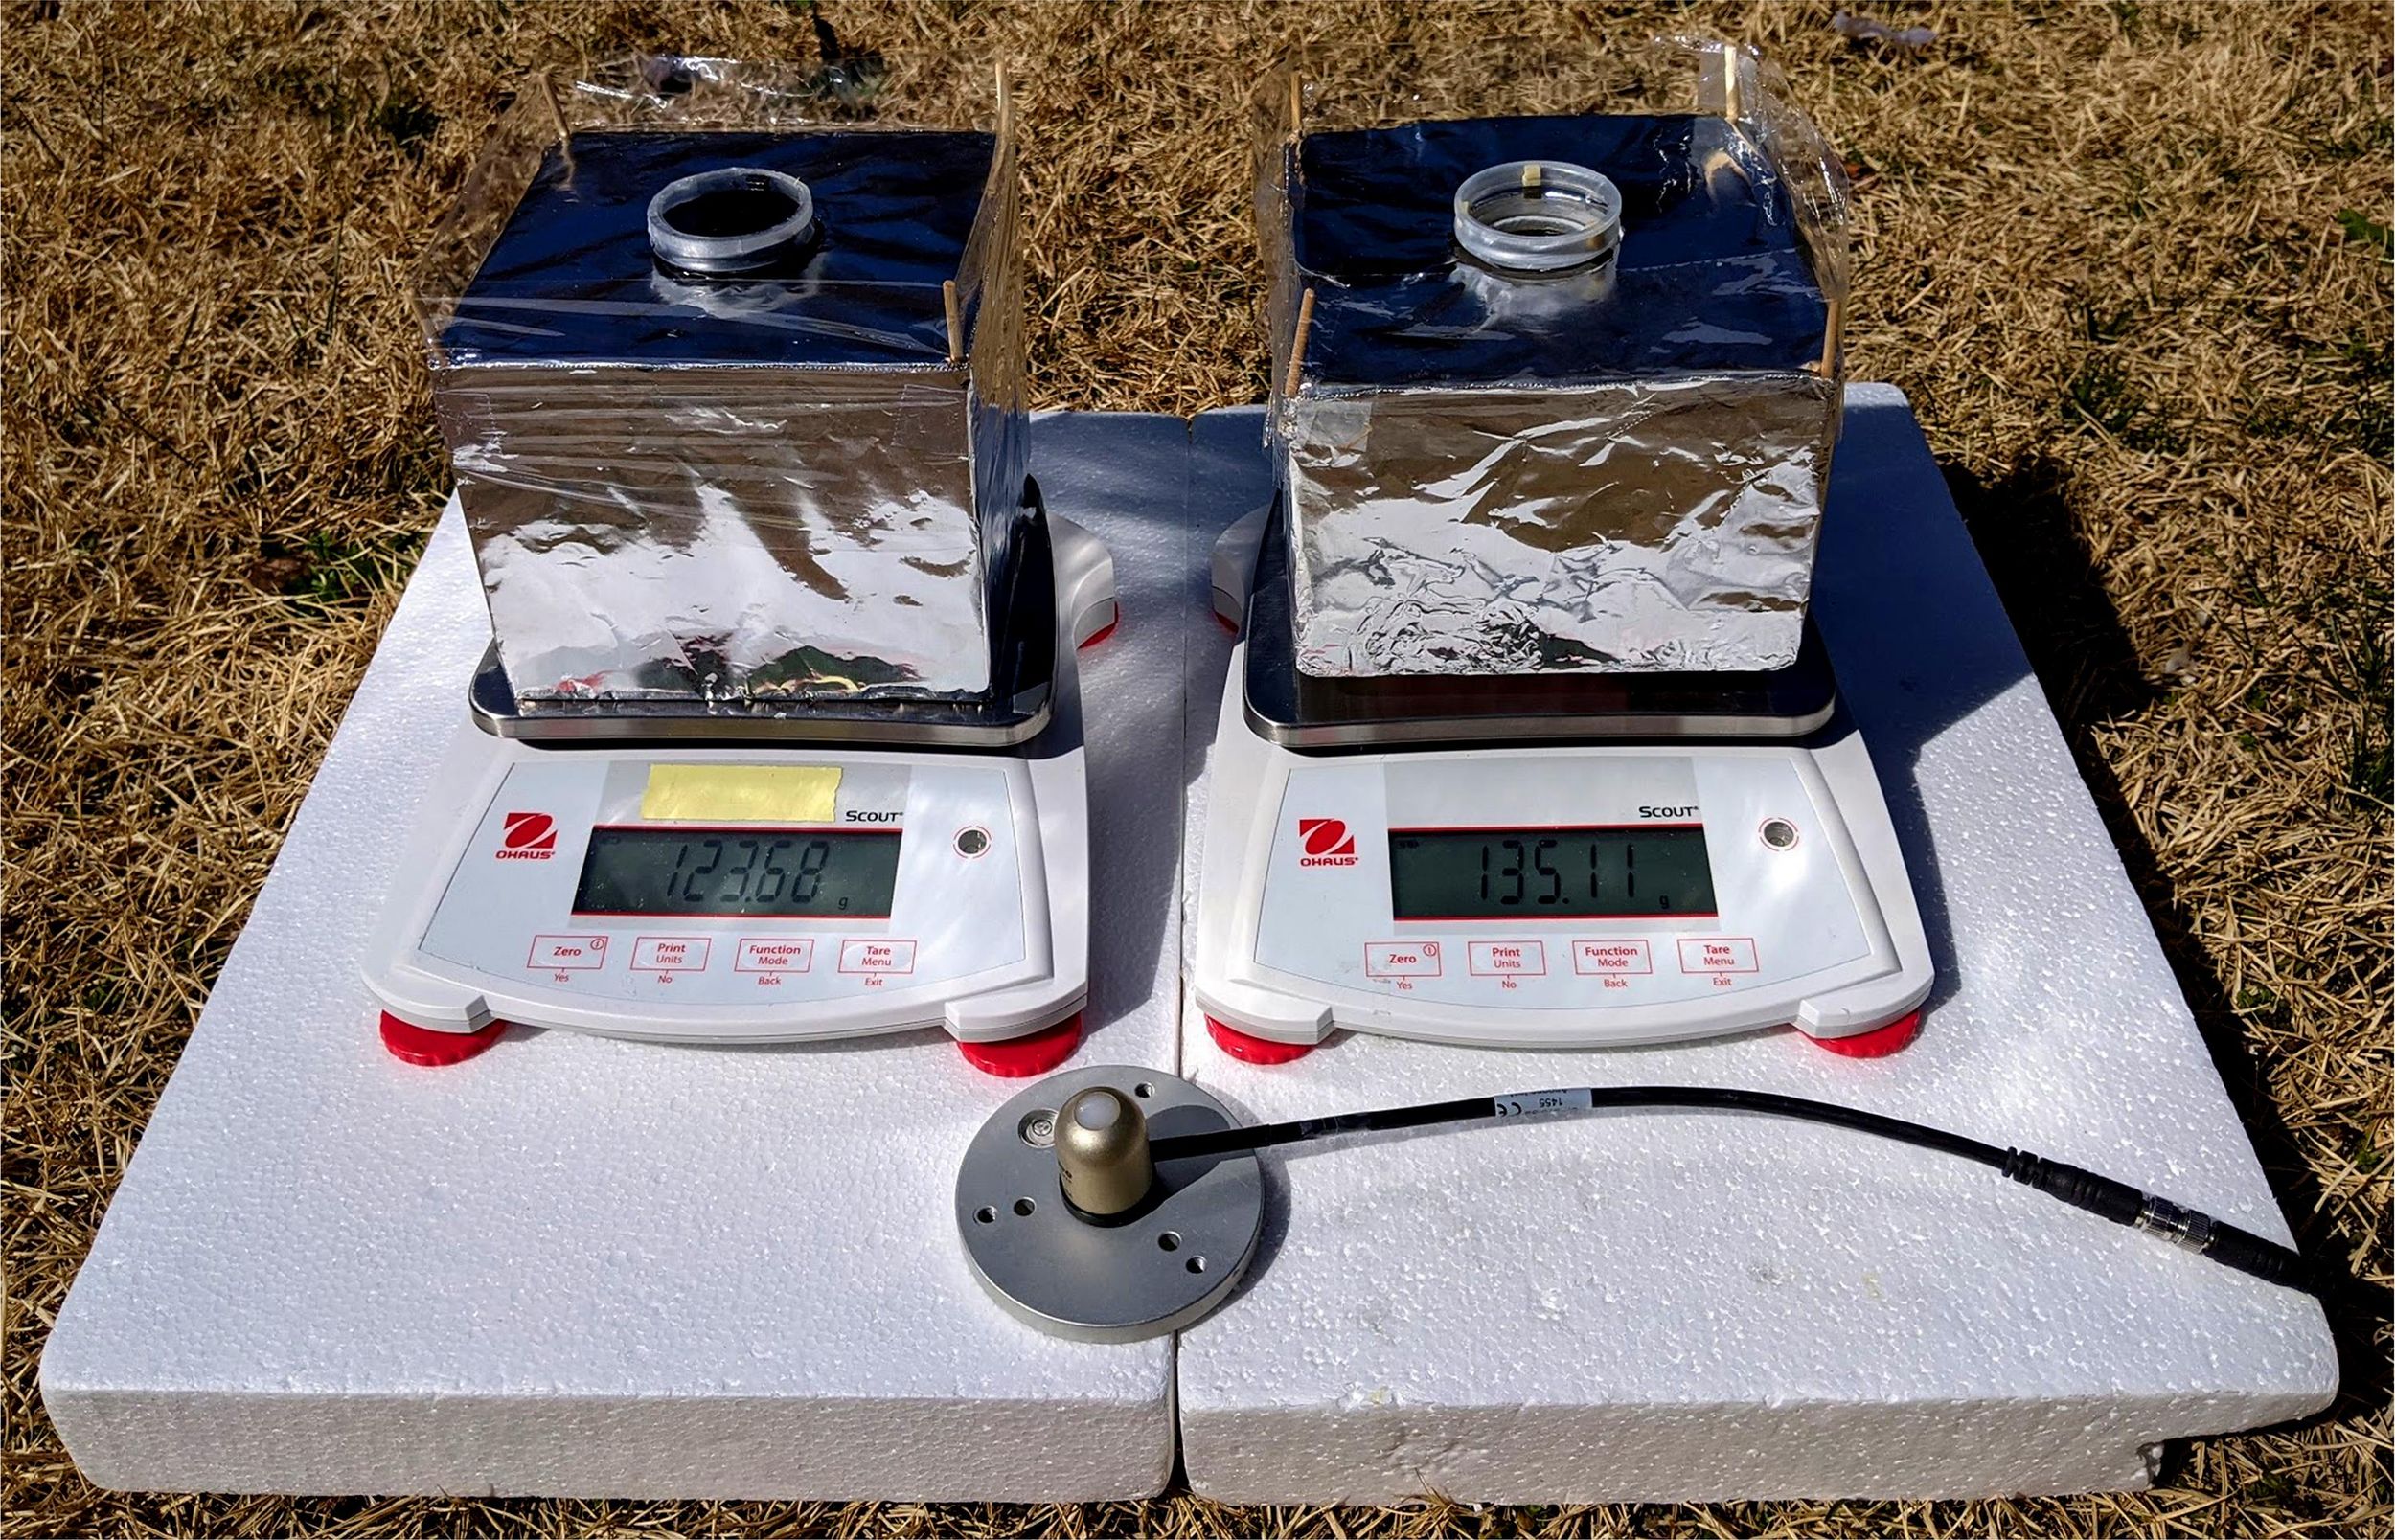 Two shiny square devices sit on equipment outside